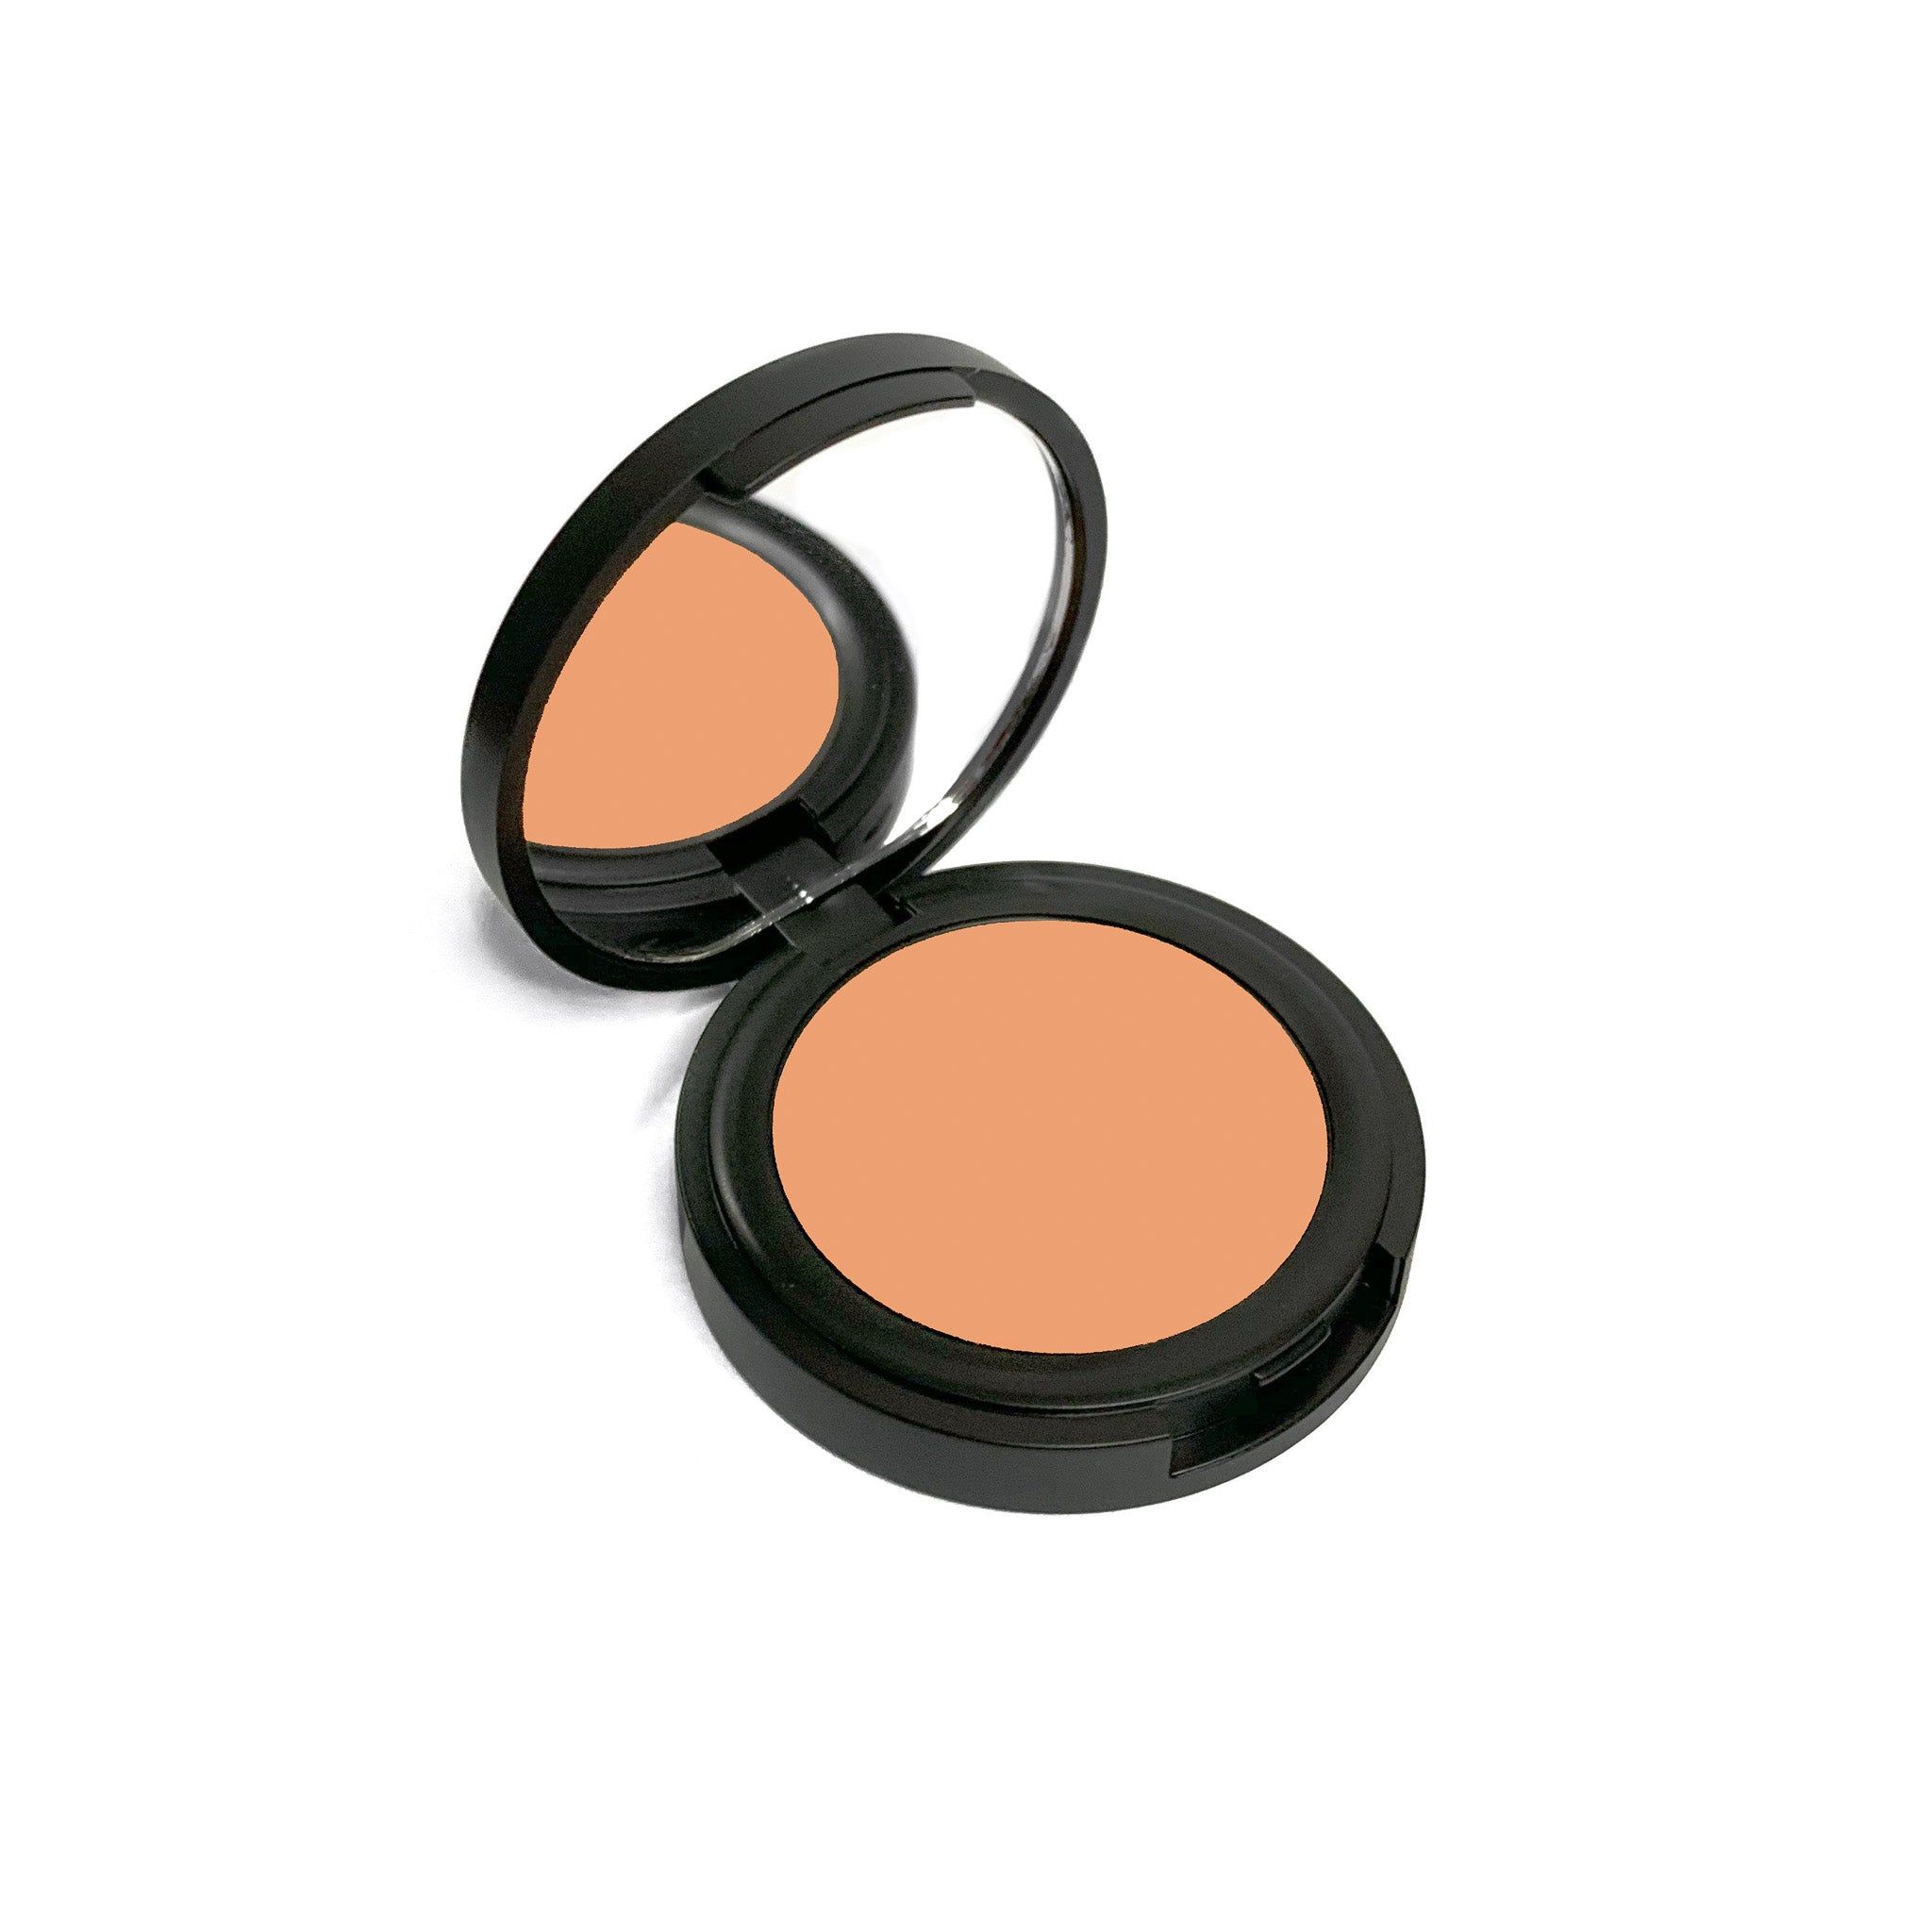 withSimplicity Cream Concealer - Apricot